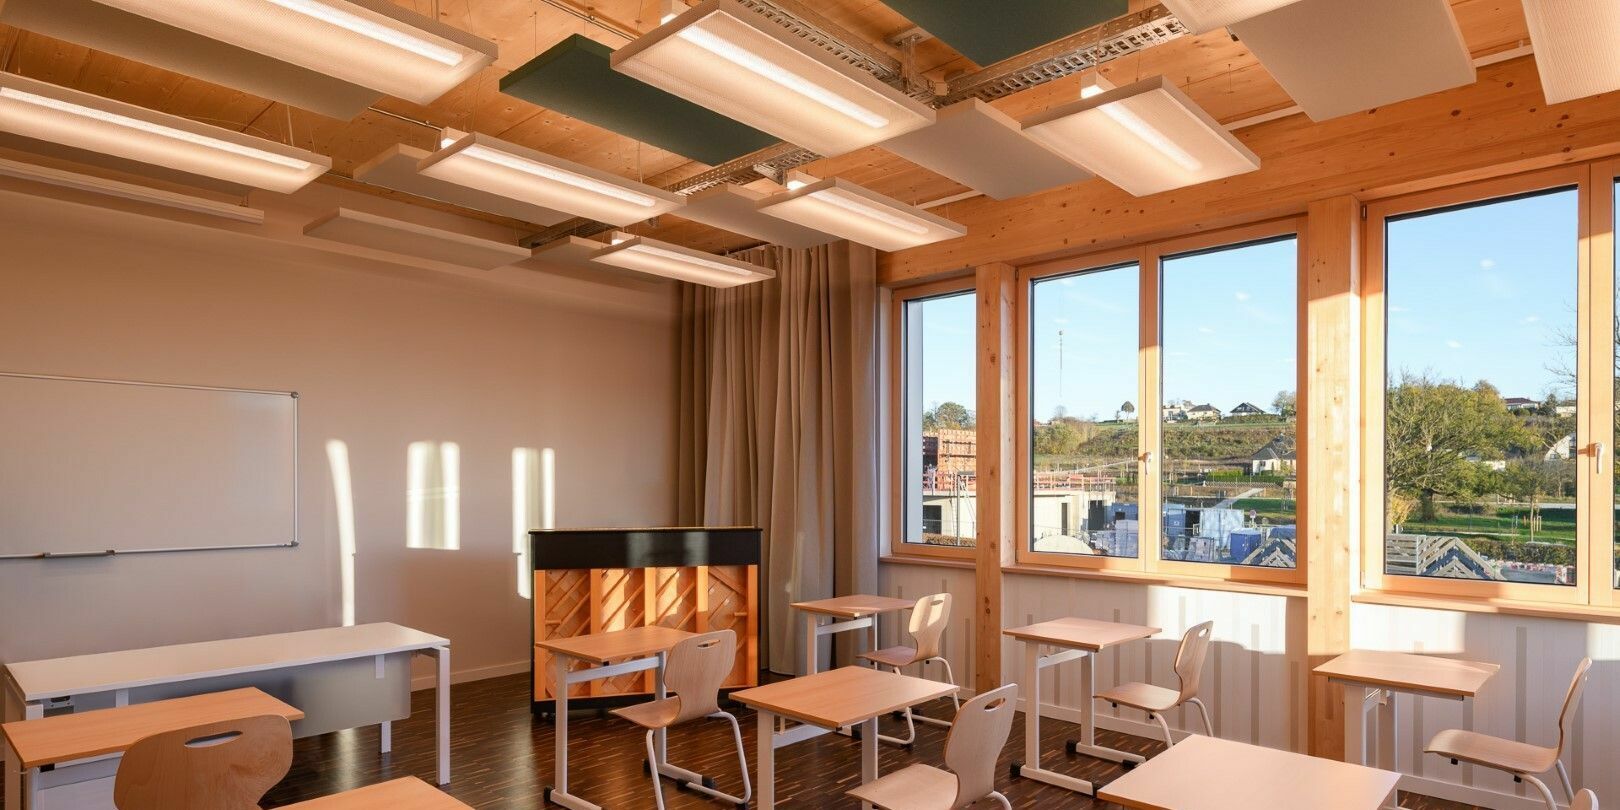 Acoustic solutions in classroom design